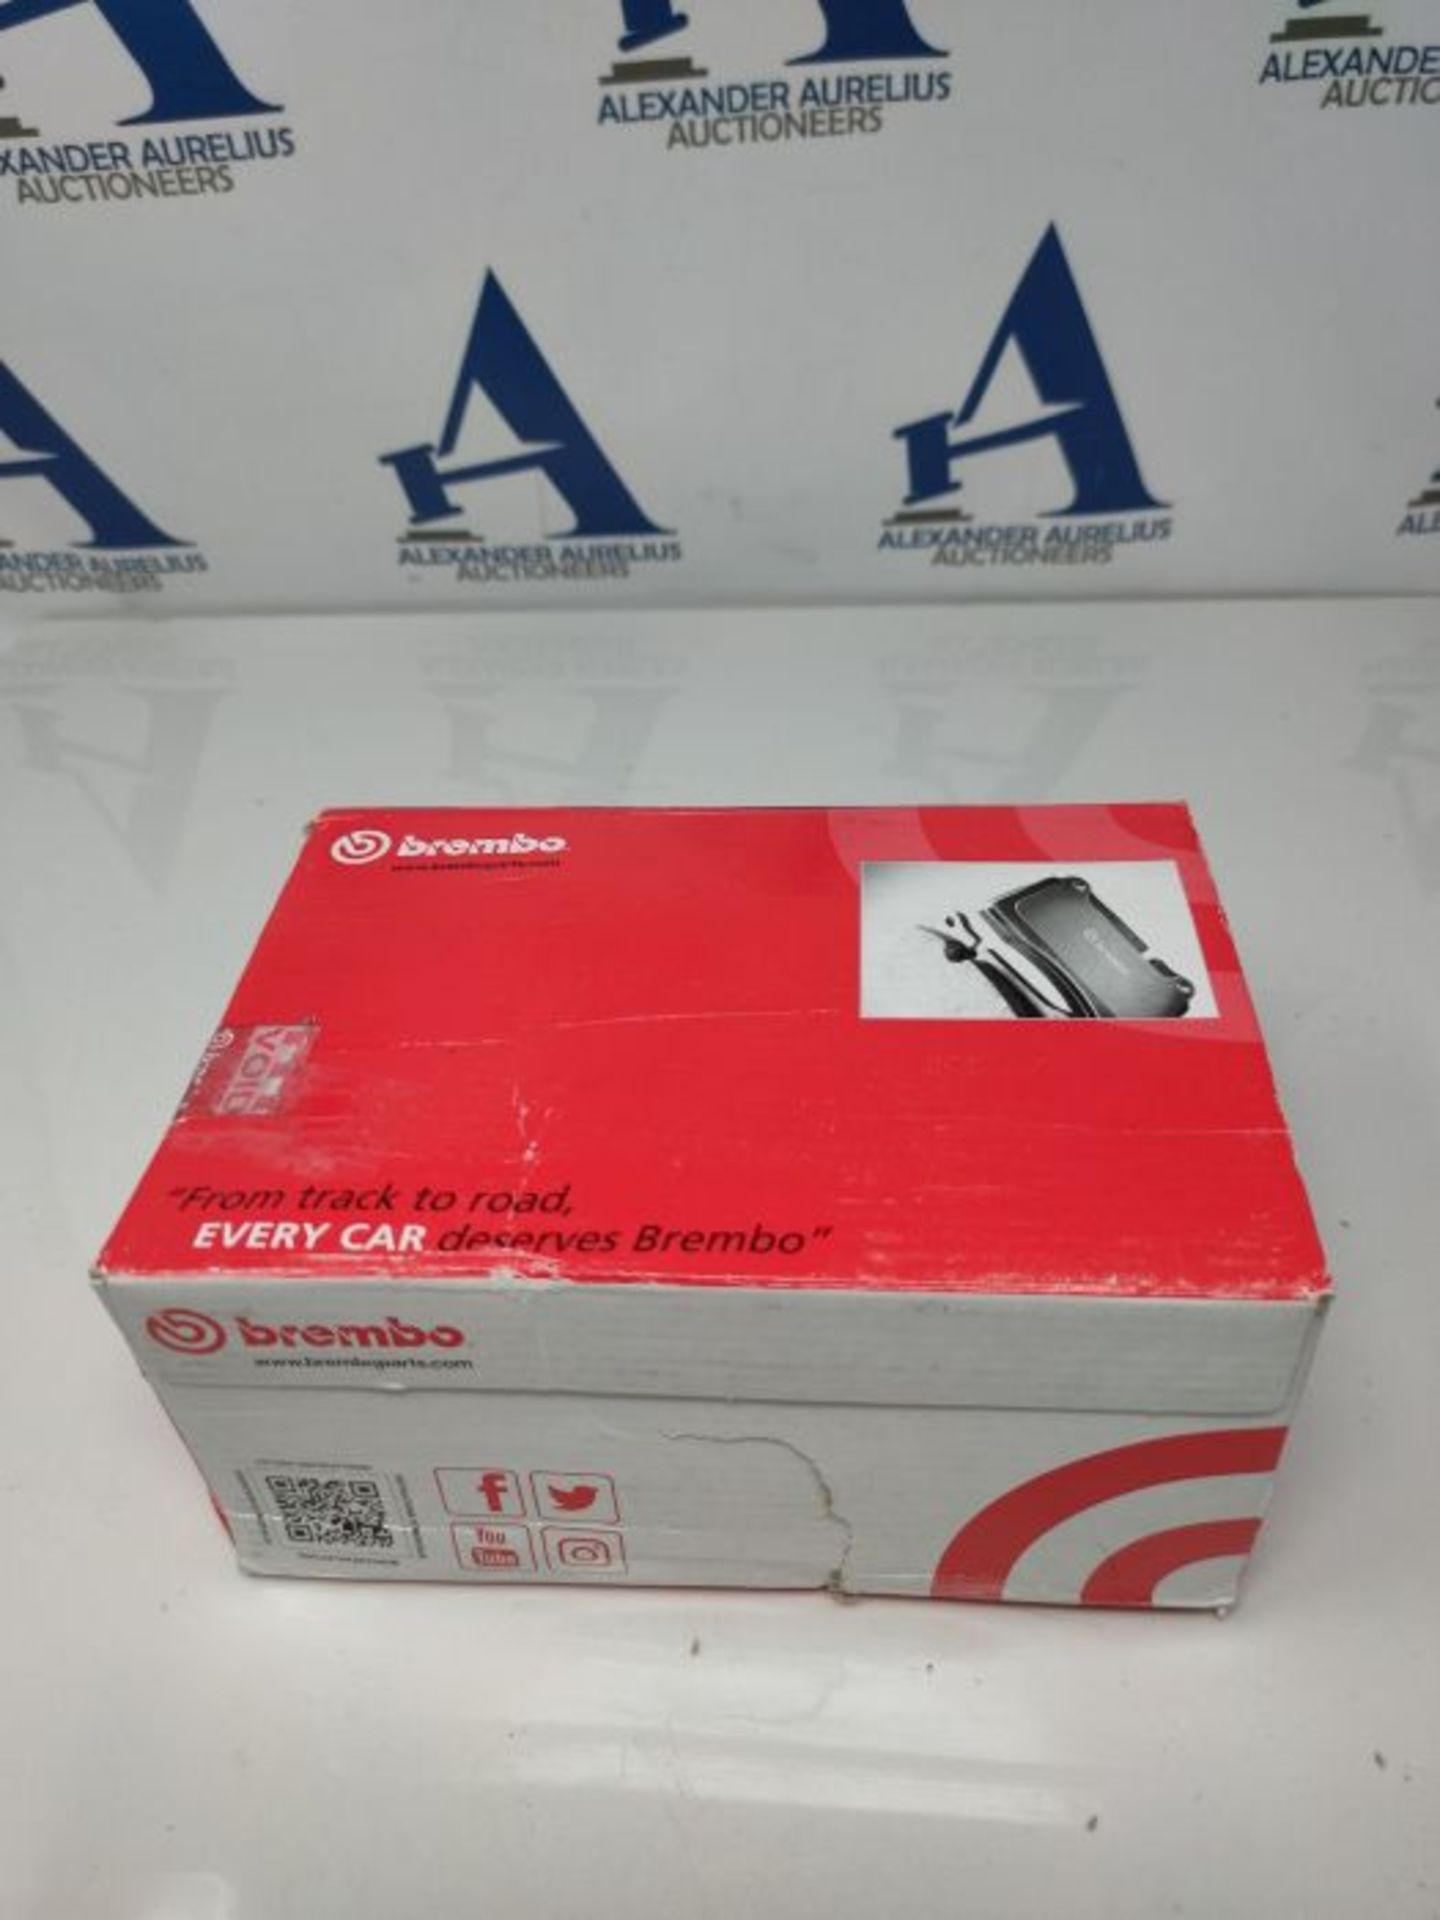 Brembo P24157 Front Disc Brake Pad, Set of 4 - Image 3 of 3